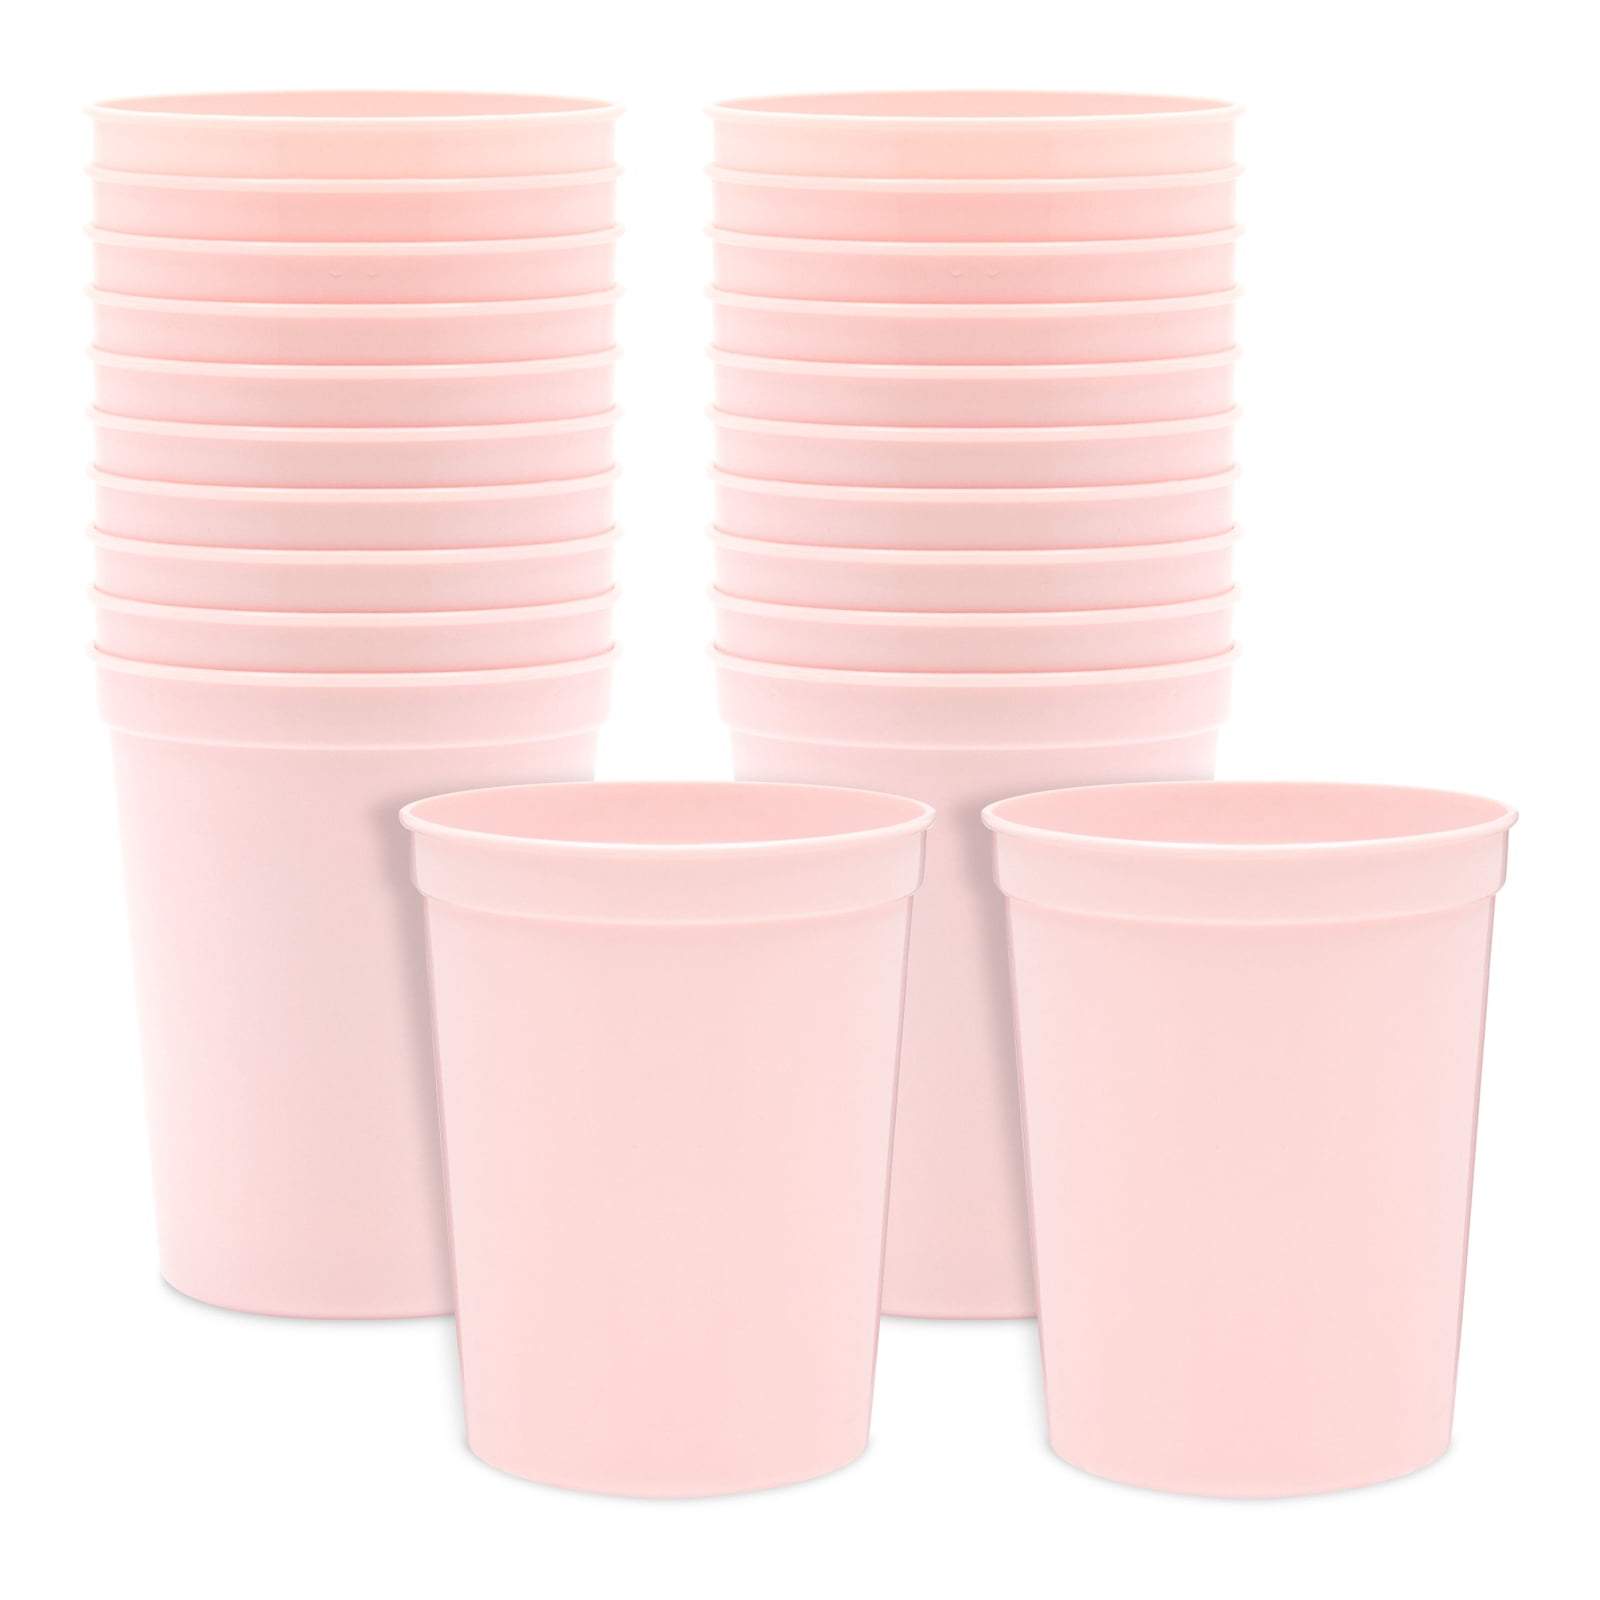 Pink Mood Cups Tropical Wedding Wedding Plastic Mood Cups 438 To Have and To Hold Beach Wedding